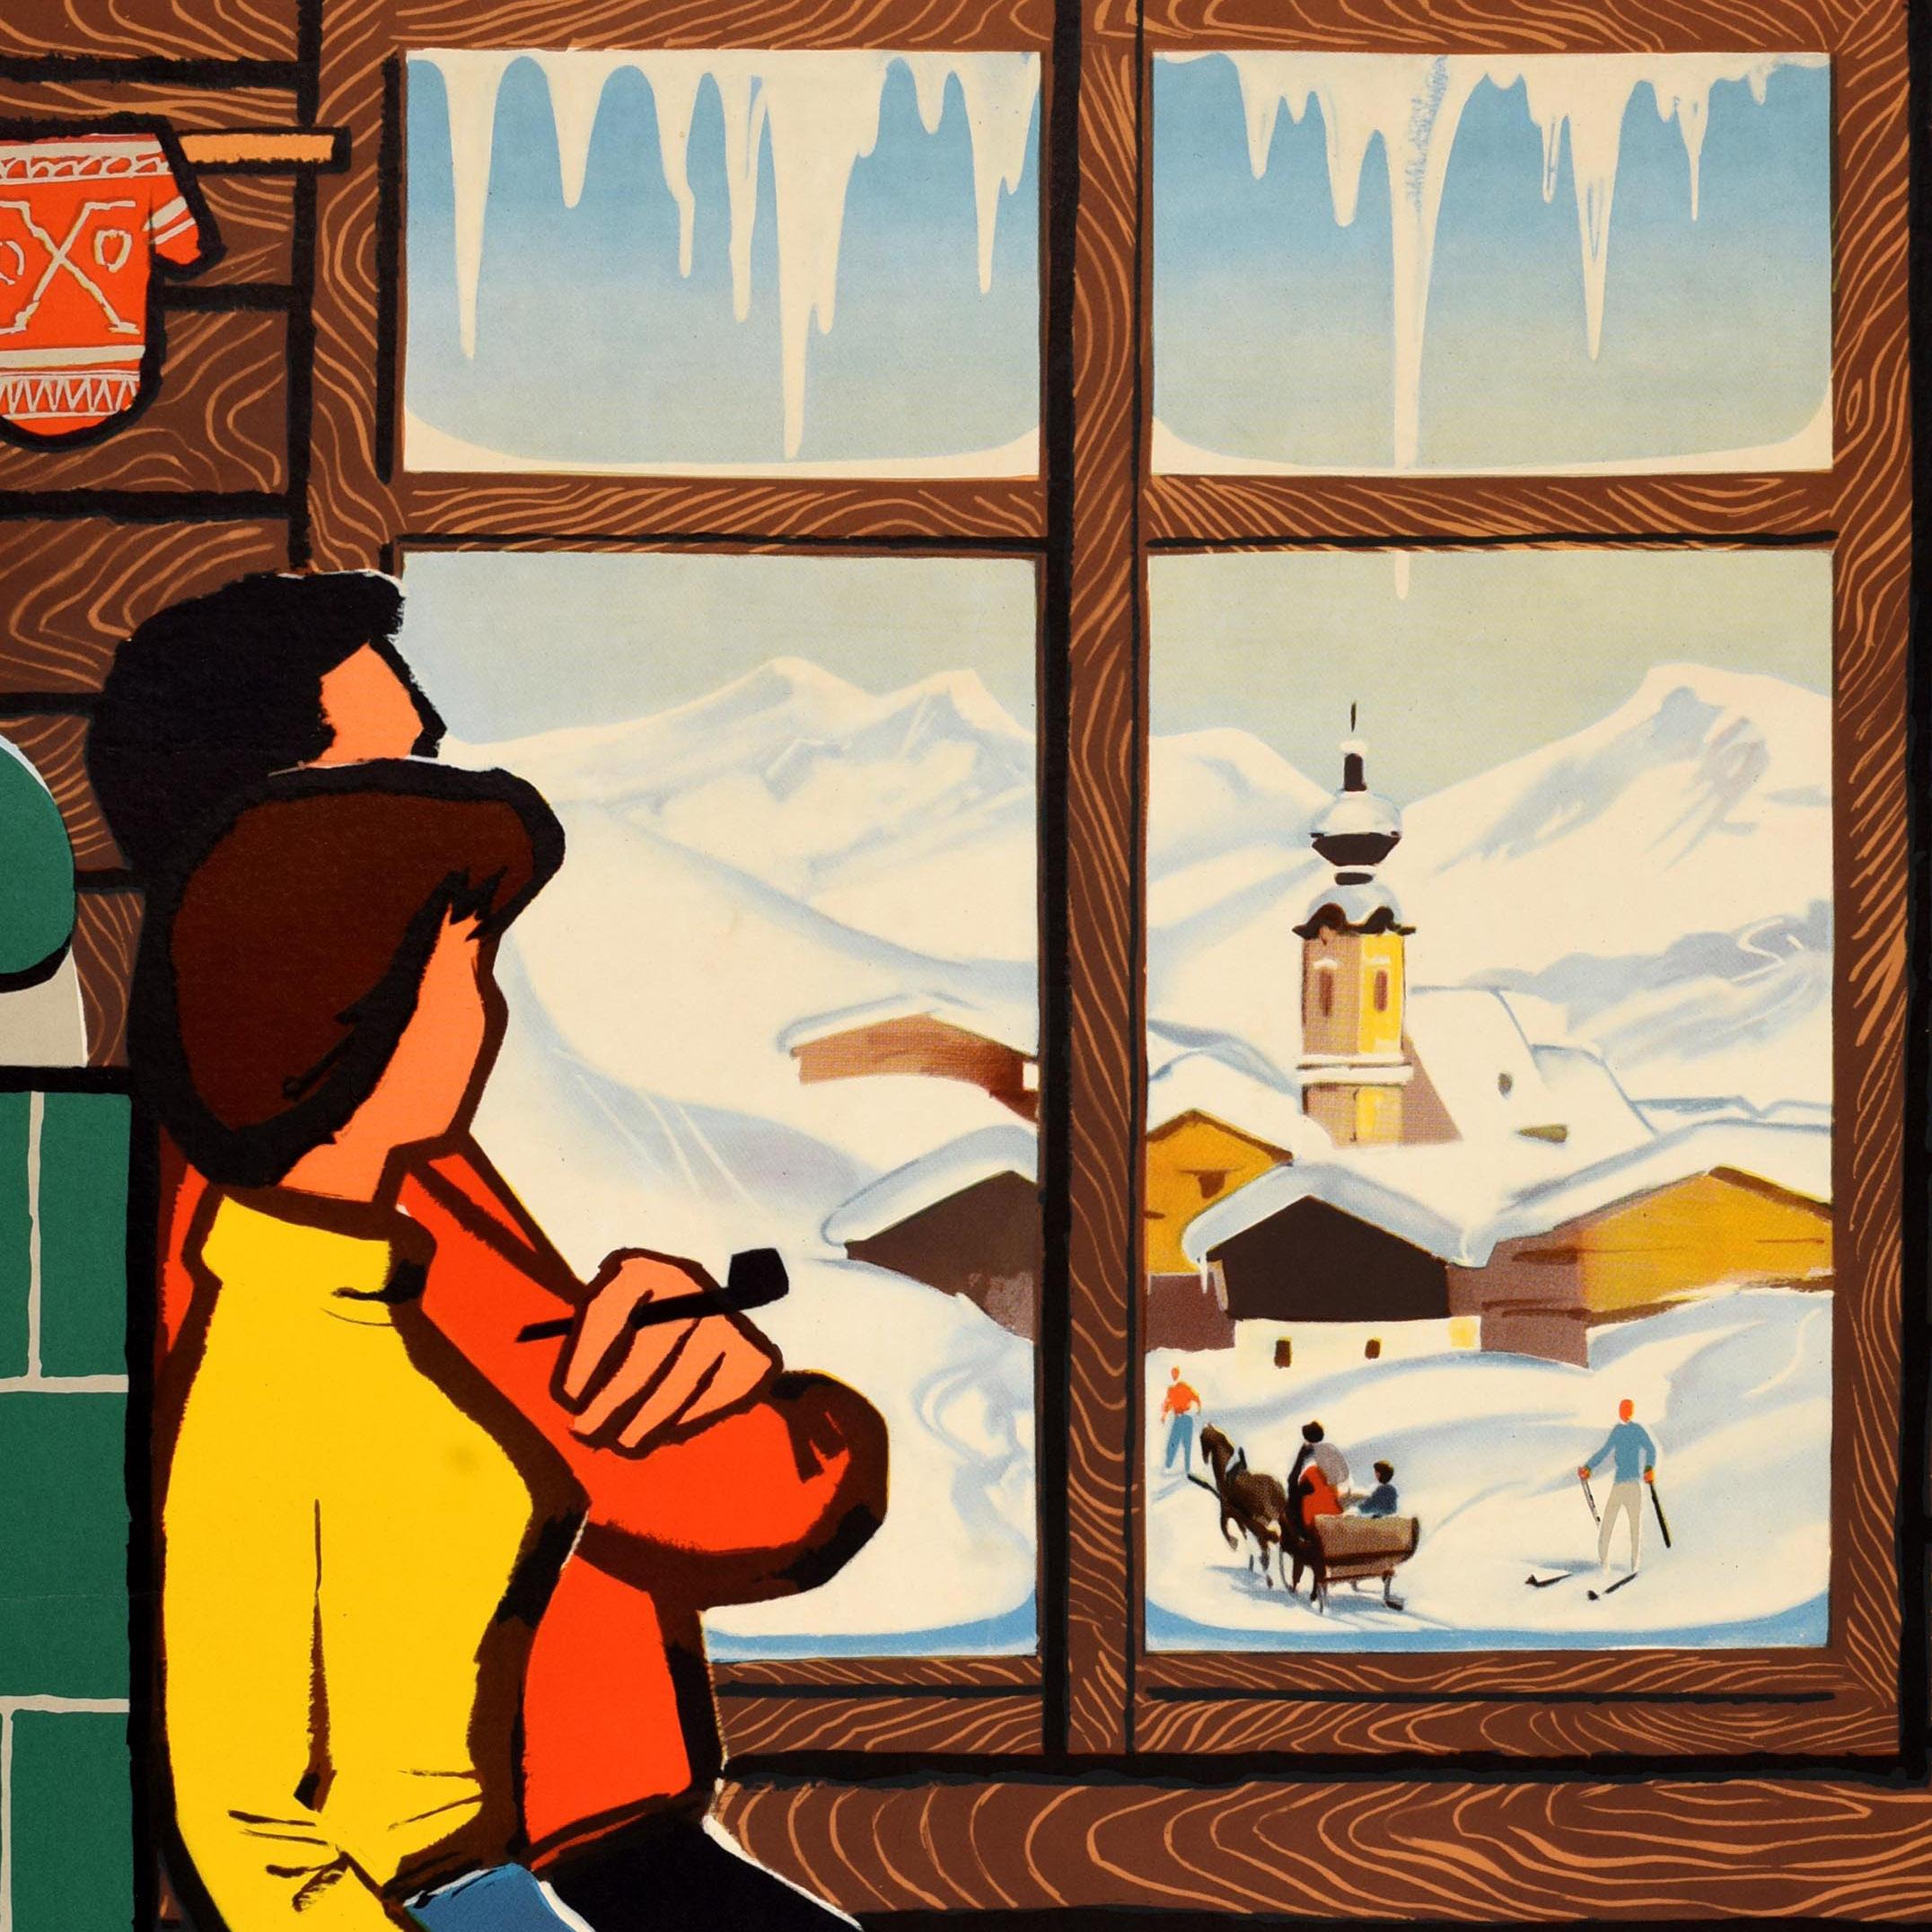 Original vintage winter sport travel poster - Take It Easy In Austria - featuring a colourful stylised image of a couple relaxing indoors, the lady wearing a bright yellow top and the man wearing a red top and holding a smoking pipe, sitting on a